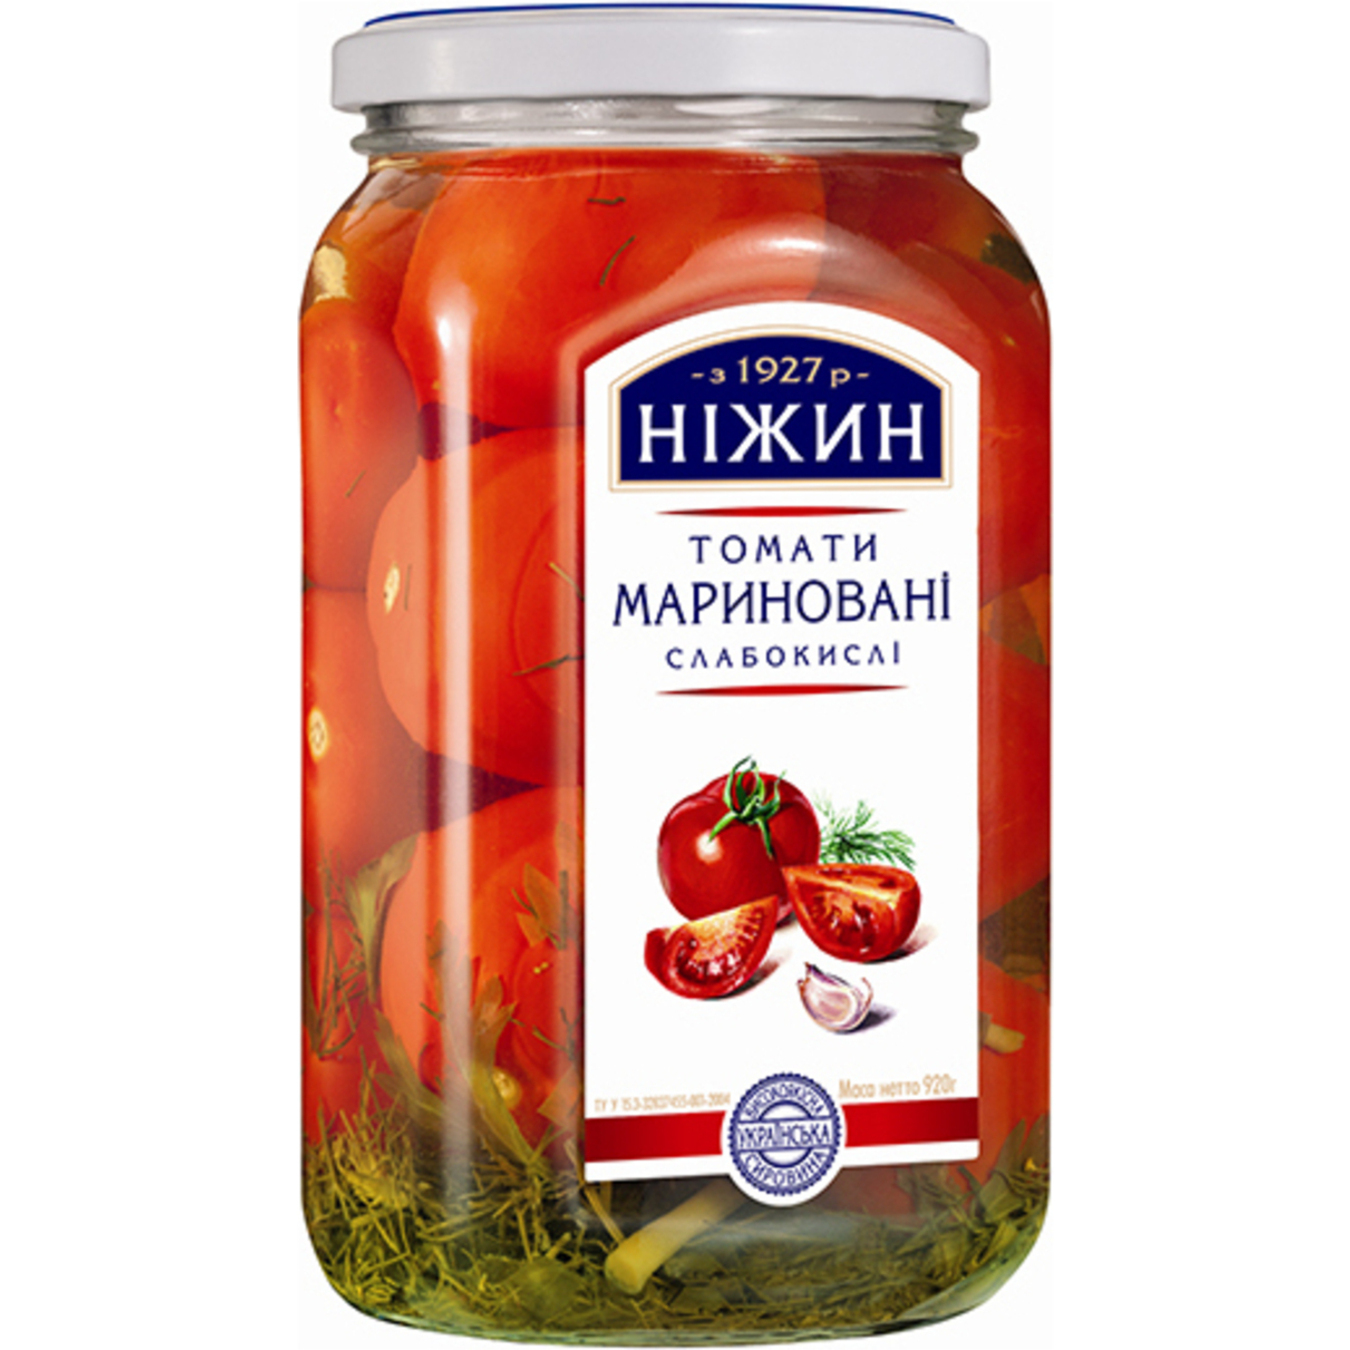 Tomatoes Nizhyn marinated weakly sour 920g